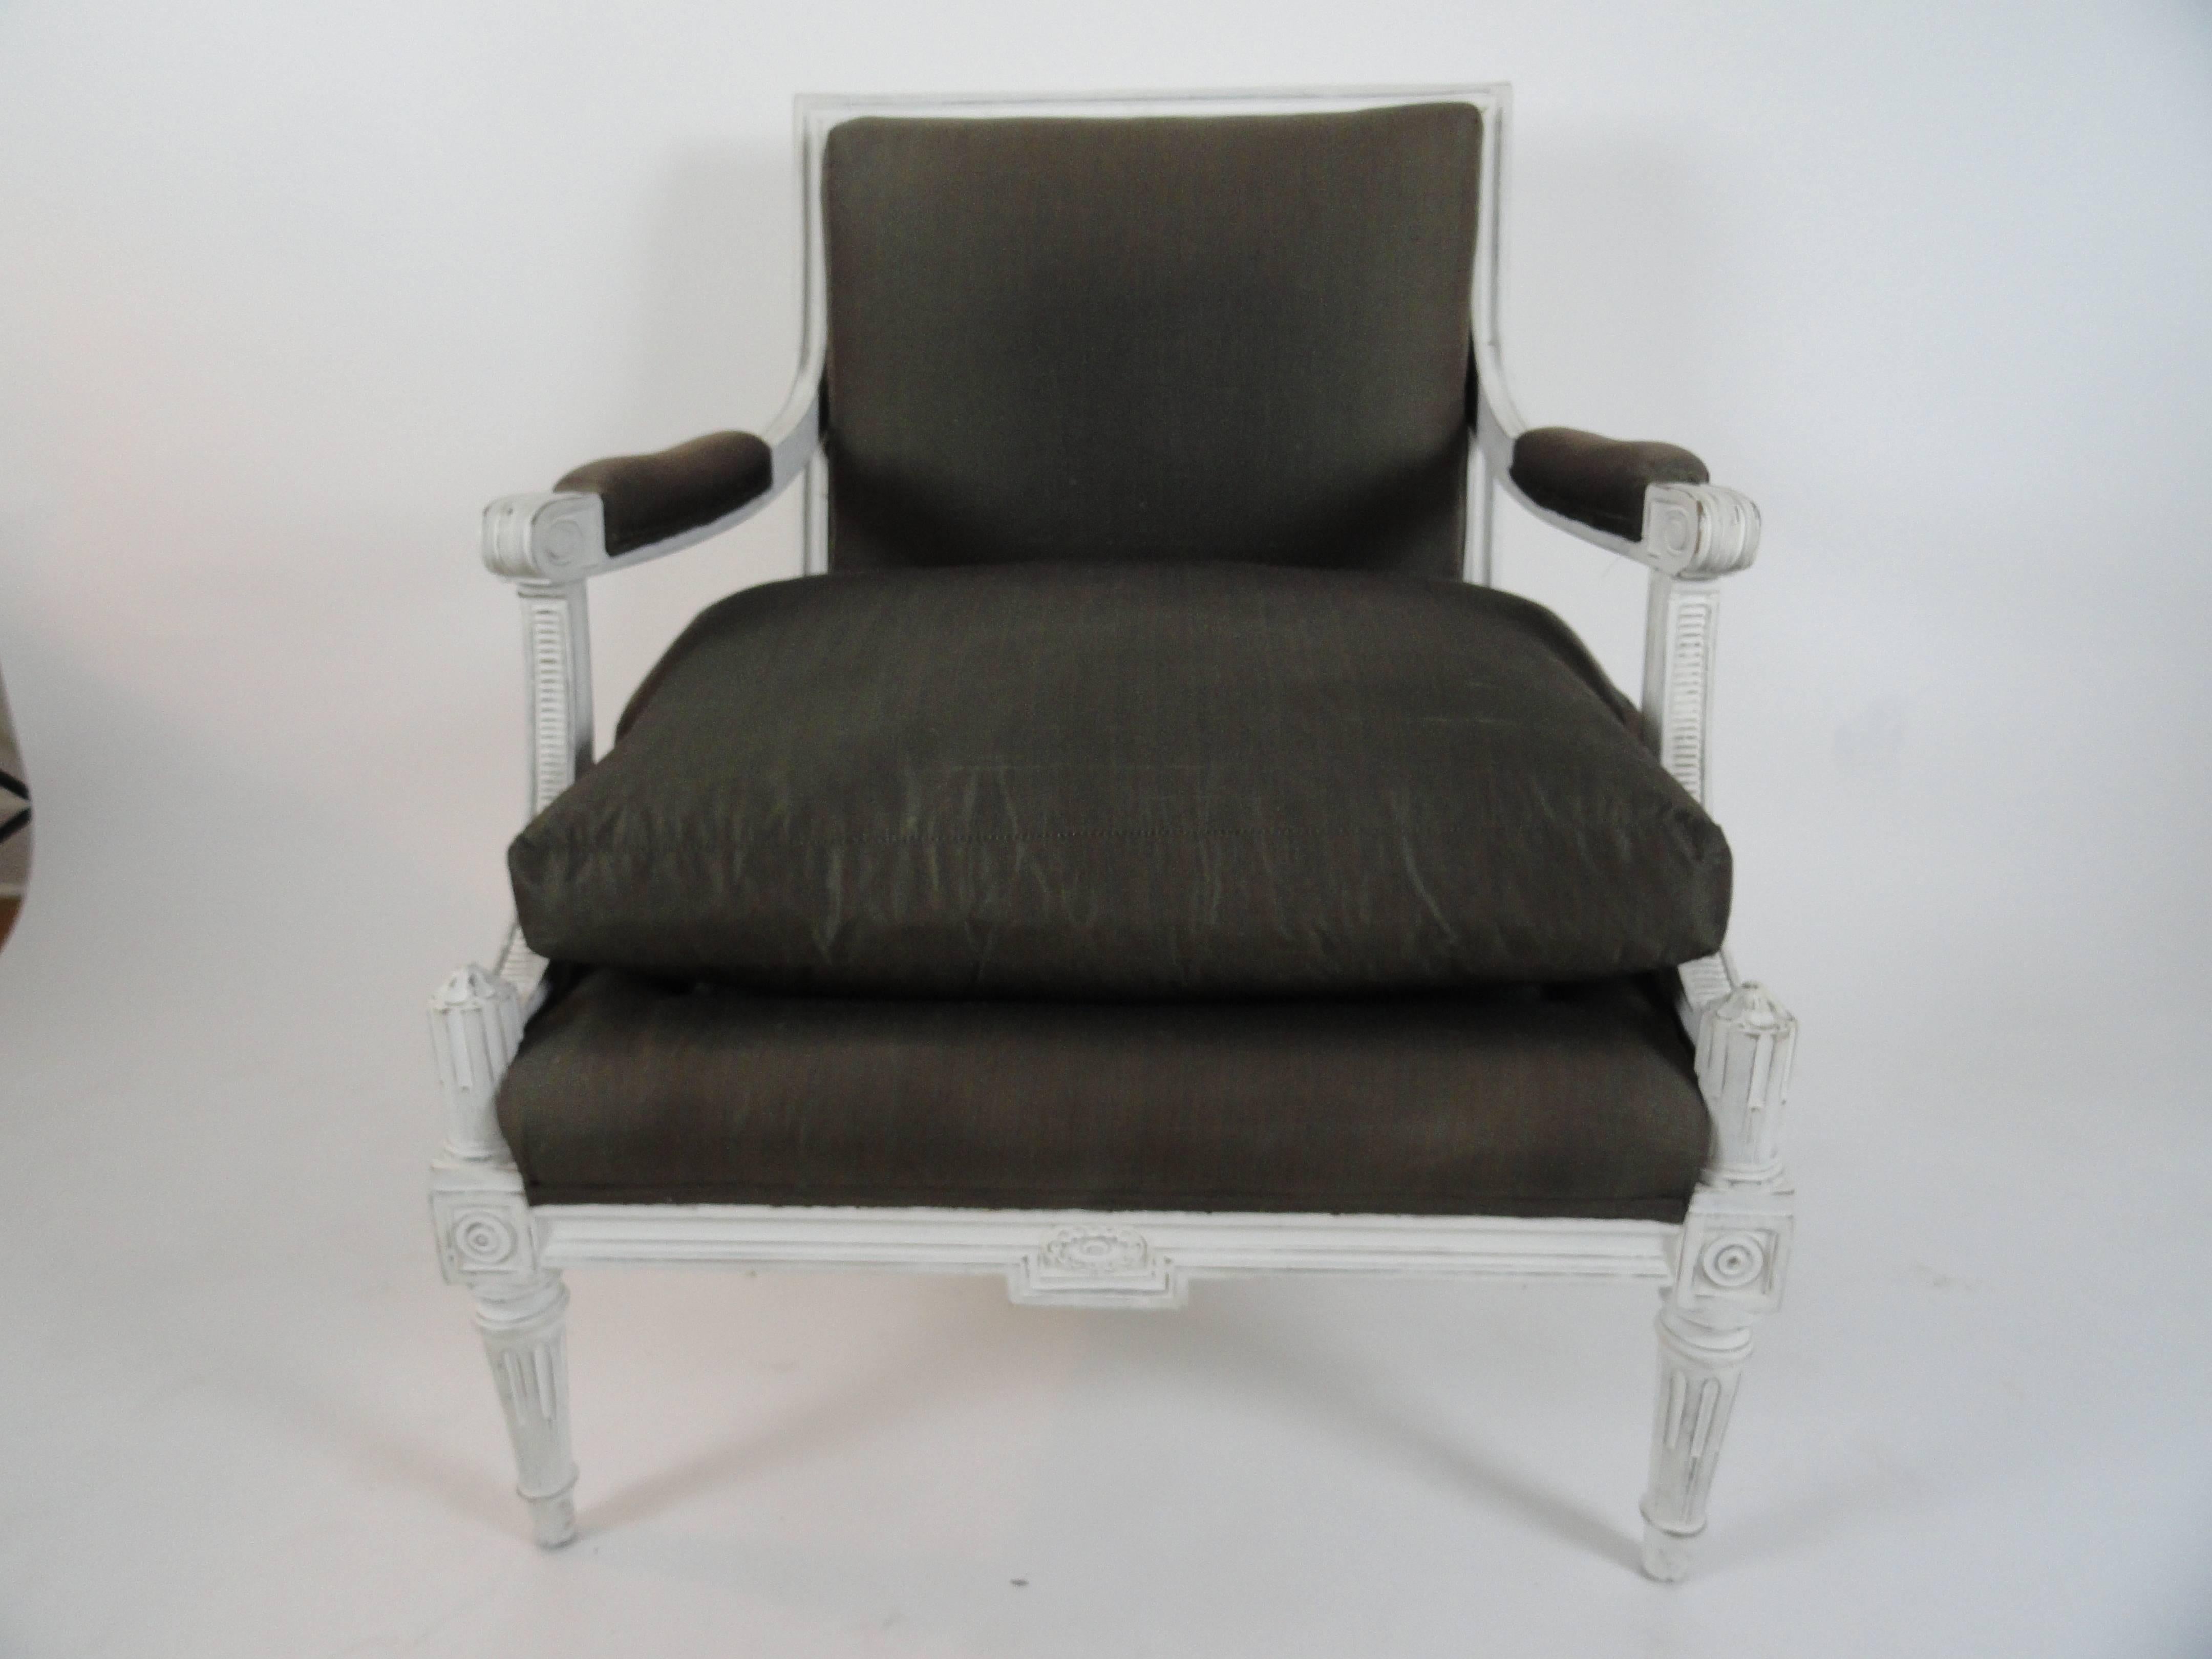 Maison Jansen Louis XVI style armchair or fauteuil. Wood painted white, newer finish, and distressed. Upholstered in Henry Calvin Athena Taffeta (50% silk, 50% cotton). Comfortable.